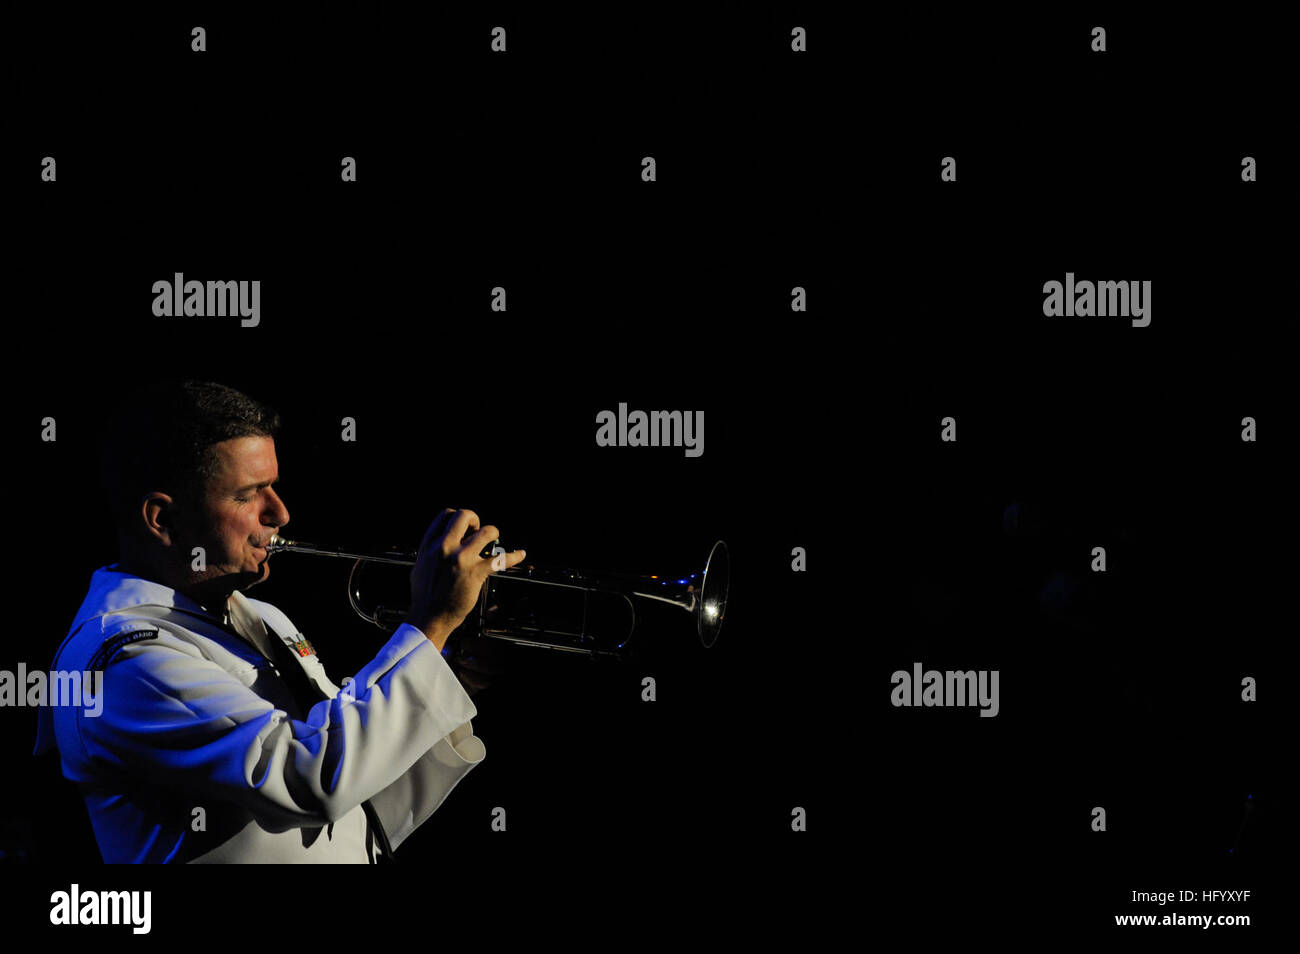 110715-N-RM525-551 SAN SALVADOR, El Salvador (July 15, 2011) Musician 1st Class Nathan Goebel, from Bayport, N.Y., plays the trumpet during a free concert by the U.S. Fleet Forces Band at the Industrias La Constancia Auditorium during Continuing Promise 2011. Continuing Promise is a five-month humanitarian assistance mission to the Caribbean, Central and South America. (U.S. Navy photo by Mass Communication Specialist 2nd Class Jonathen E. Davis/Released) US Navy 110715-N-RM525-551 Musician 1st Class Nathan Goebel, from Bayport, N.Y., plays the trumpet during a free concert by the U.S. Fleet F Stock Photo